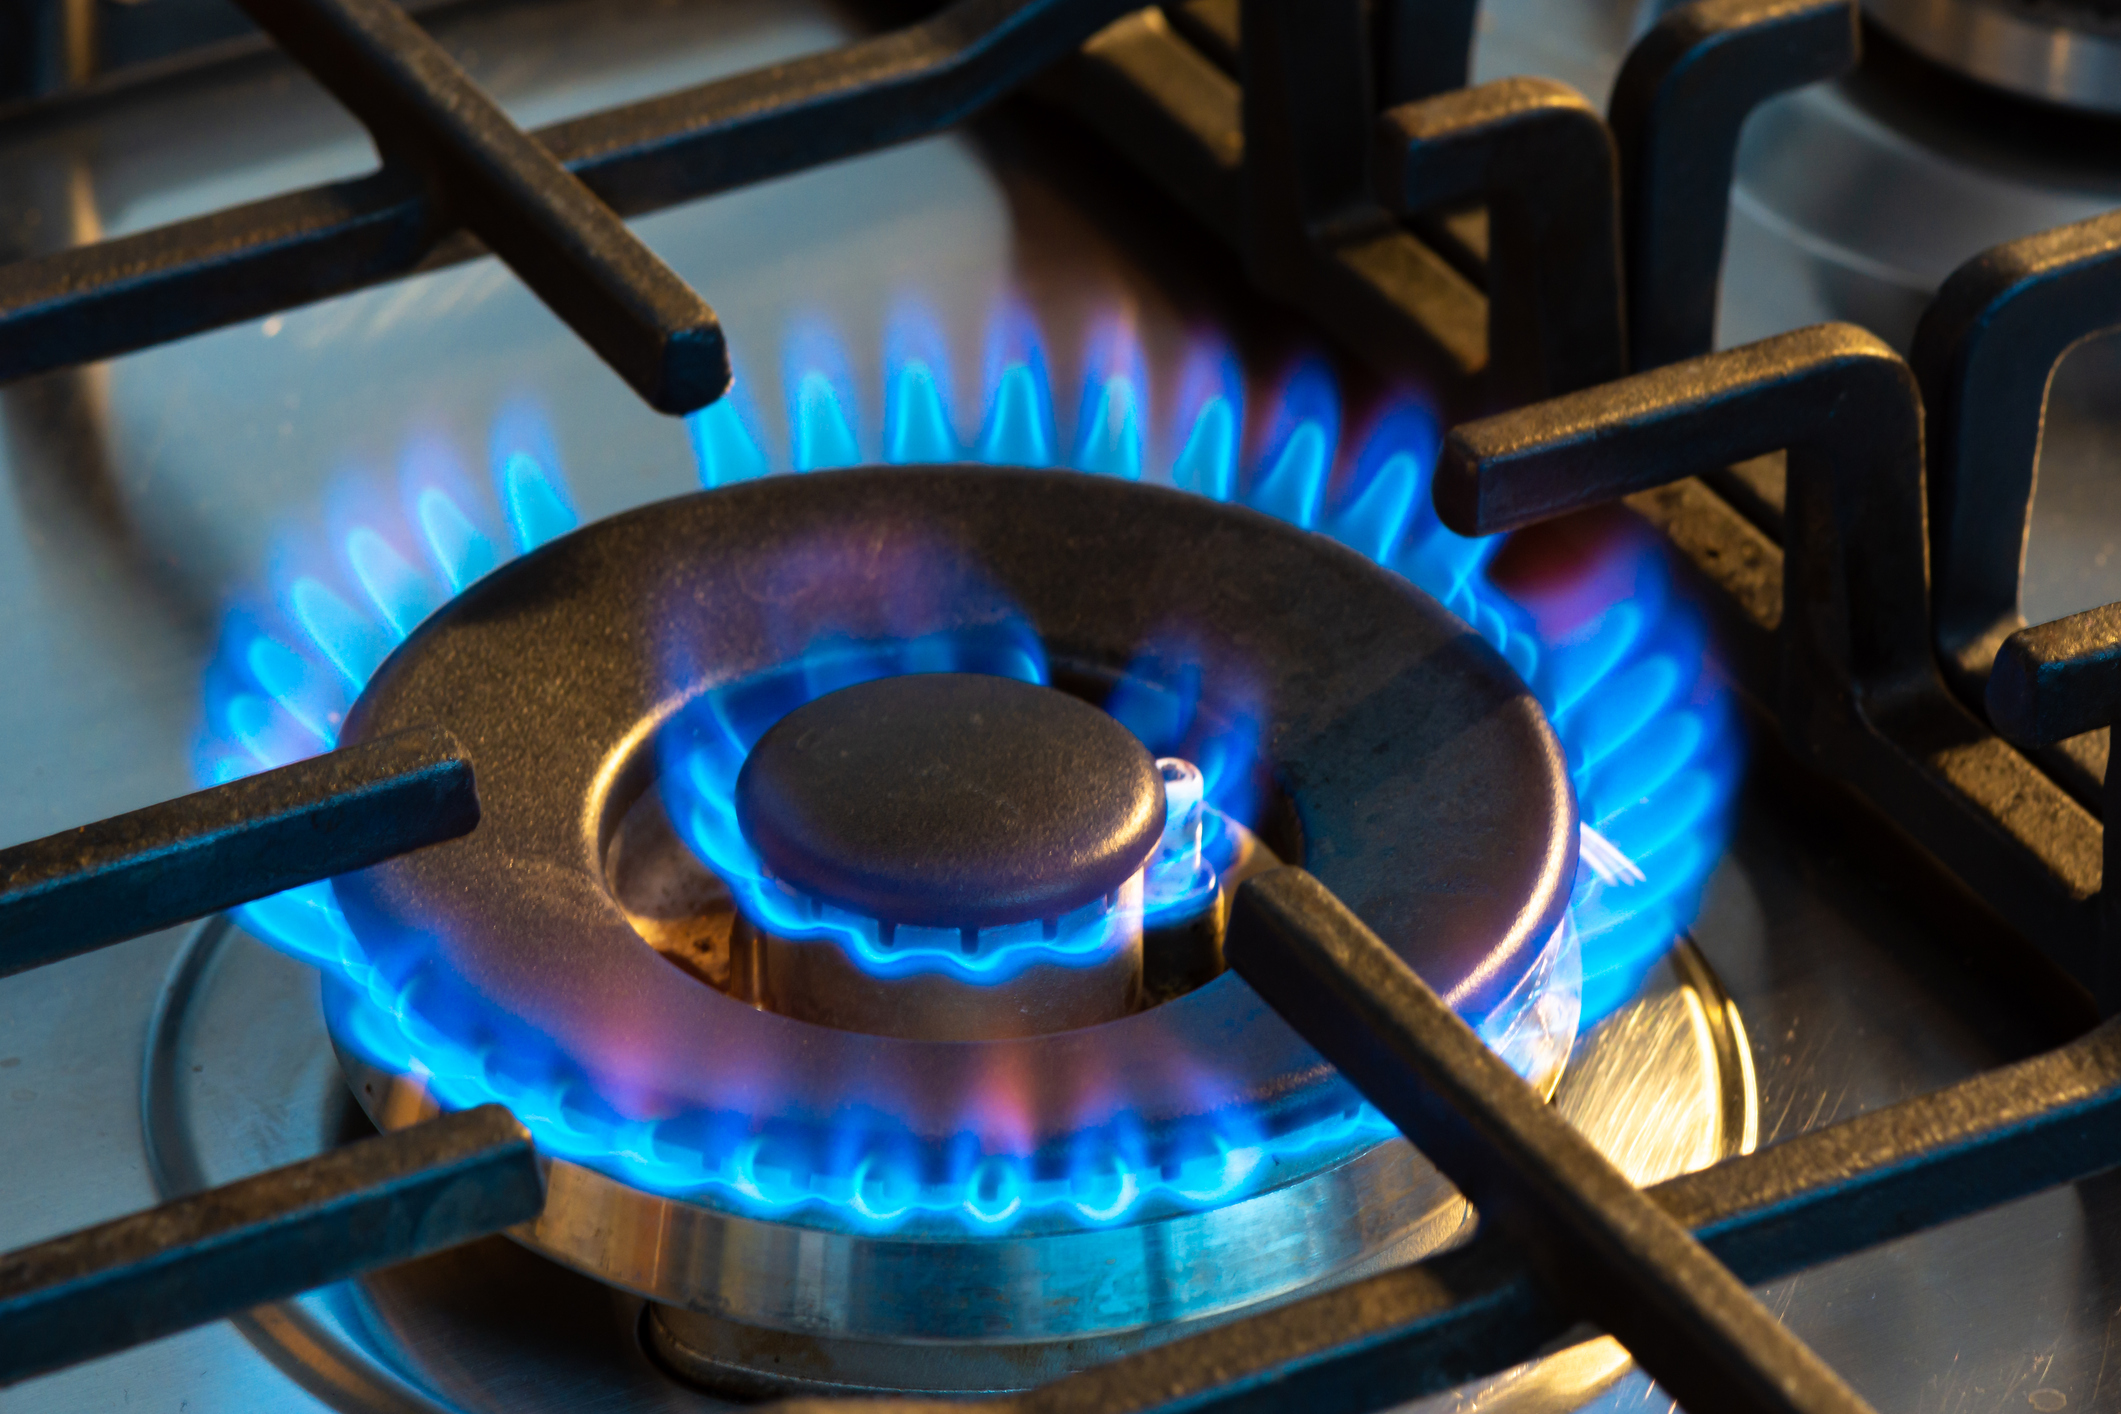 gas-burning-with-blue-flames-on-the-burner-of-a-gas-stove